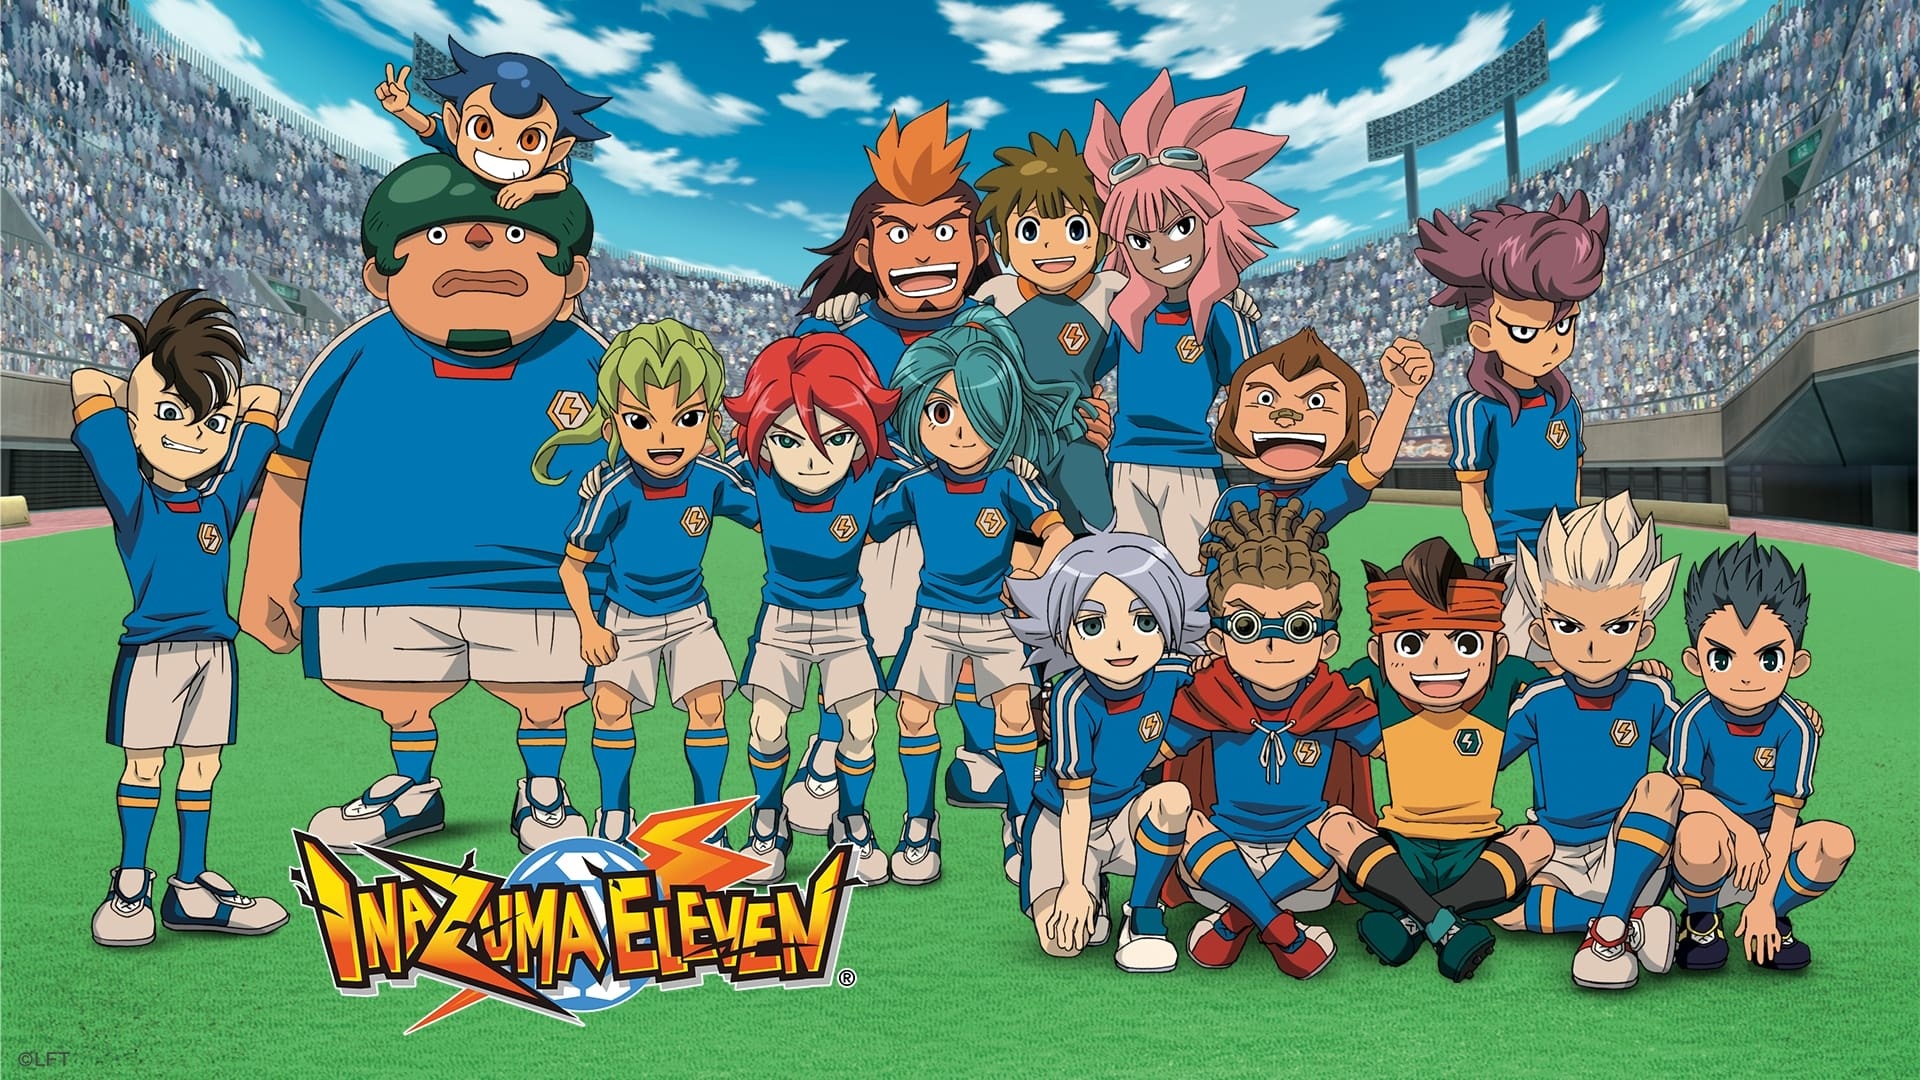 Inazuma Eleven Wallpapers (29+ images inside)